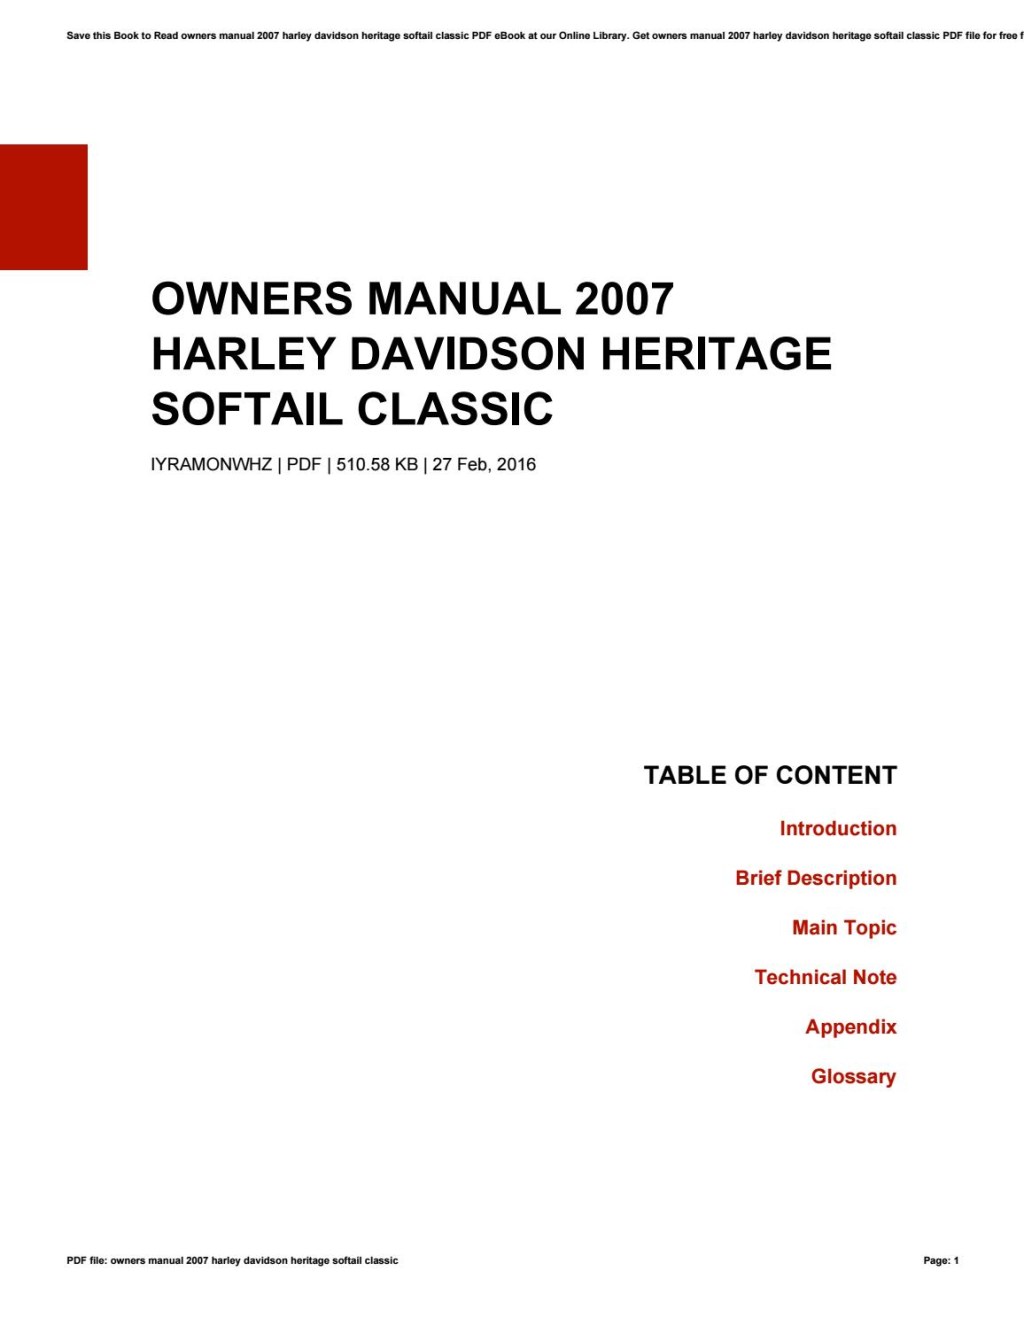 Picture of: Owners manual  harley davidson heritage softail classic by